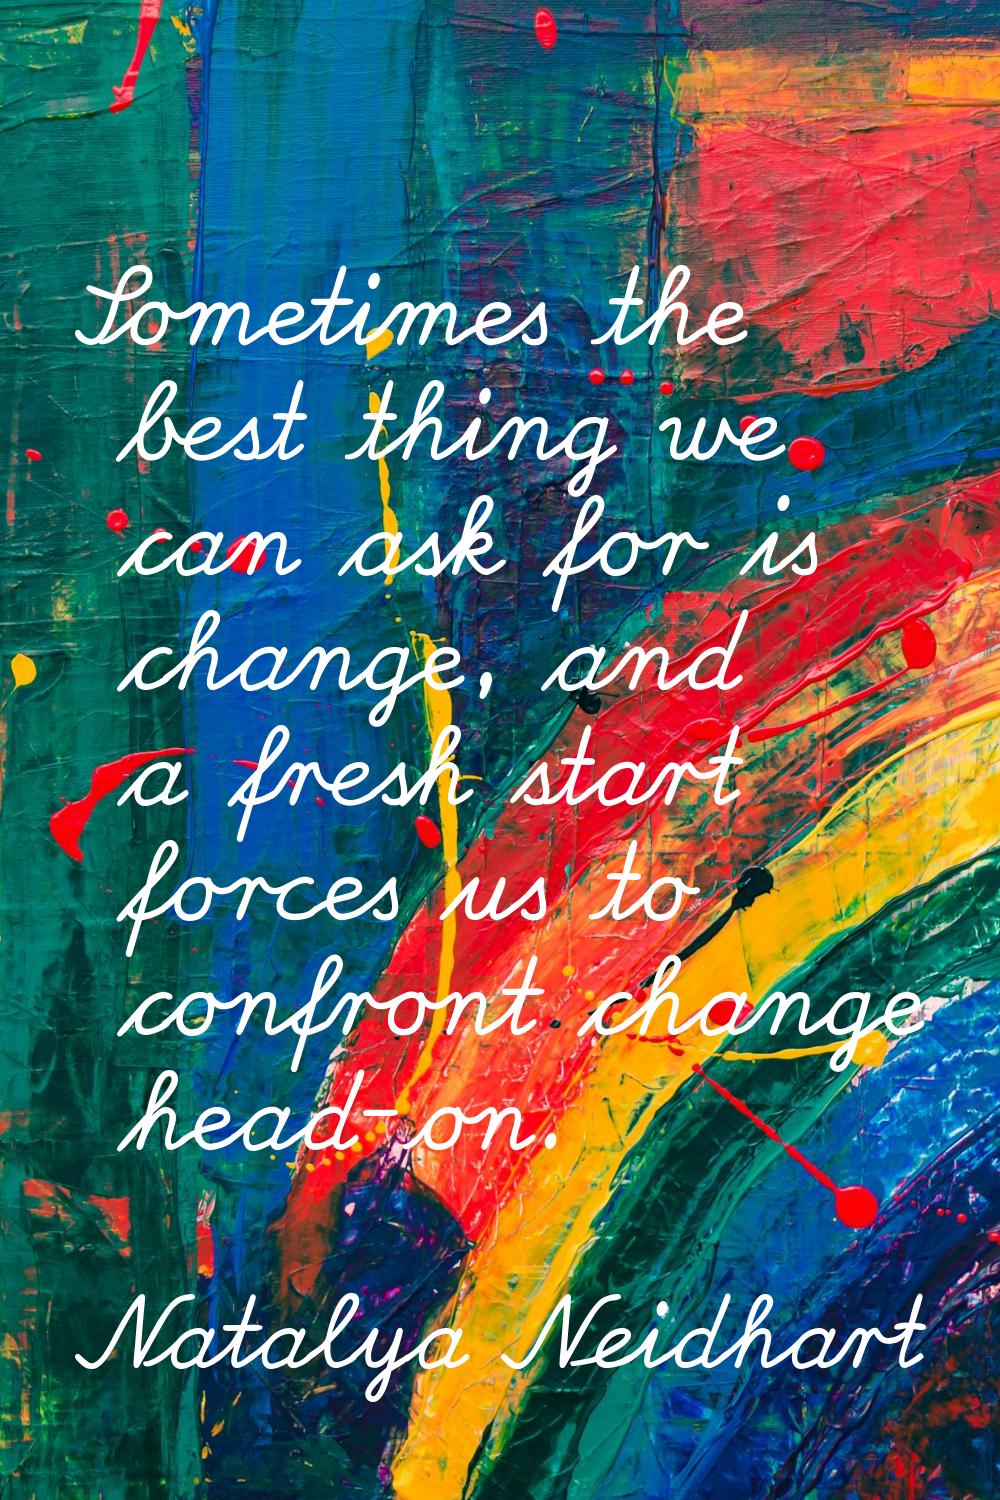 Sometimes the best thing we can ask for is change, and a fresh start forces us to confront change h